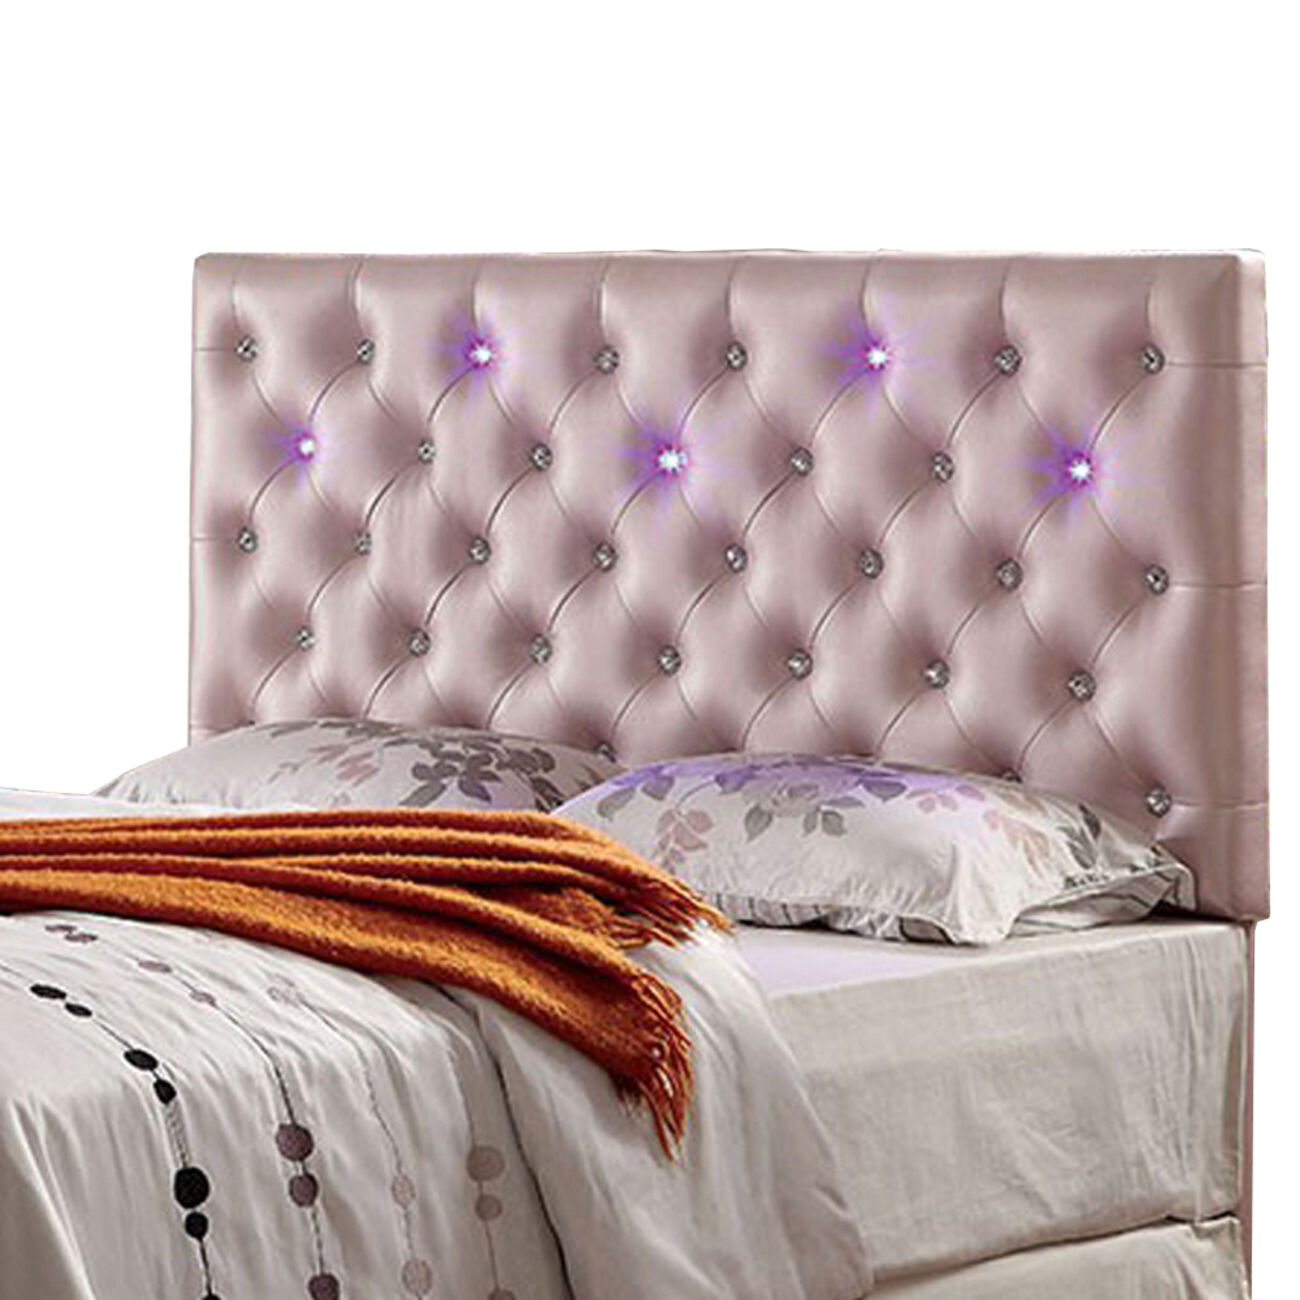 Upholstered King Bed Headboard With Led Lighting, Pink